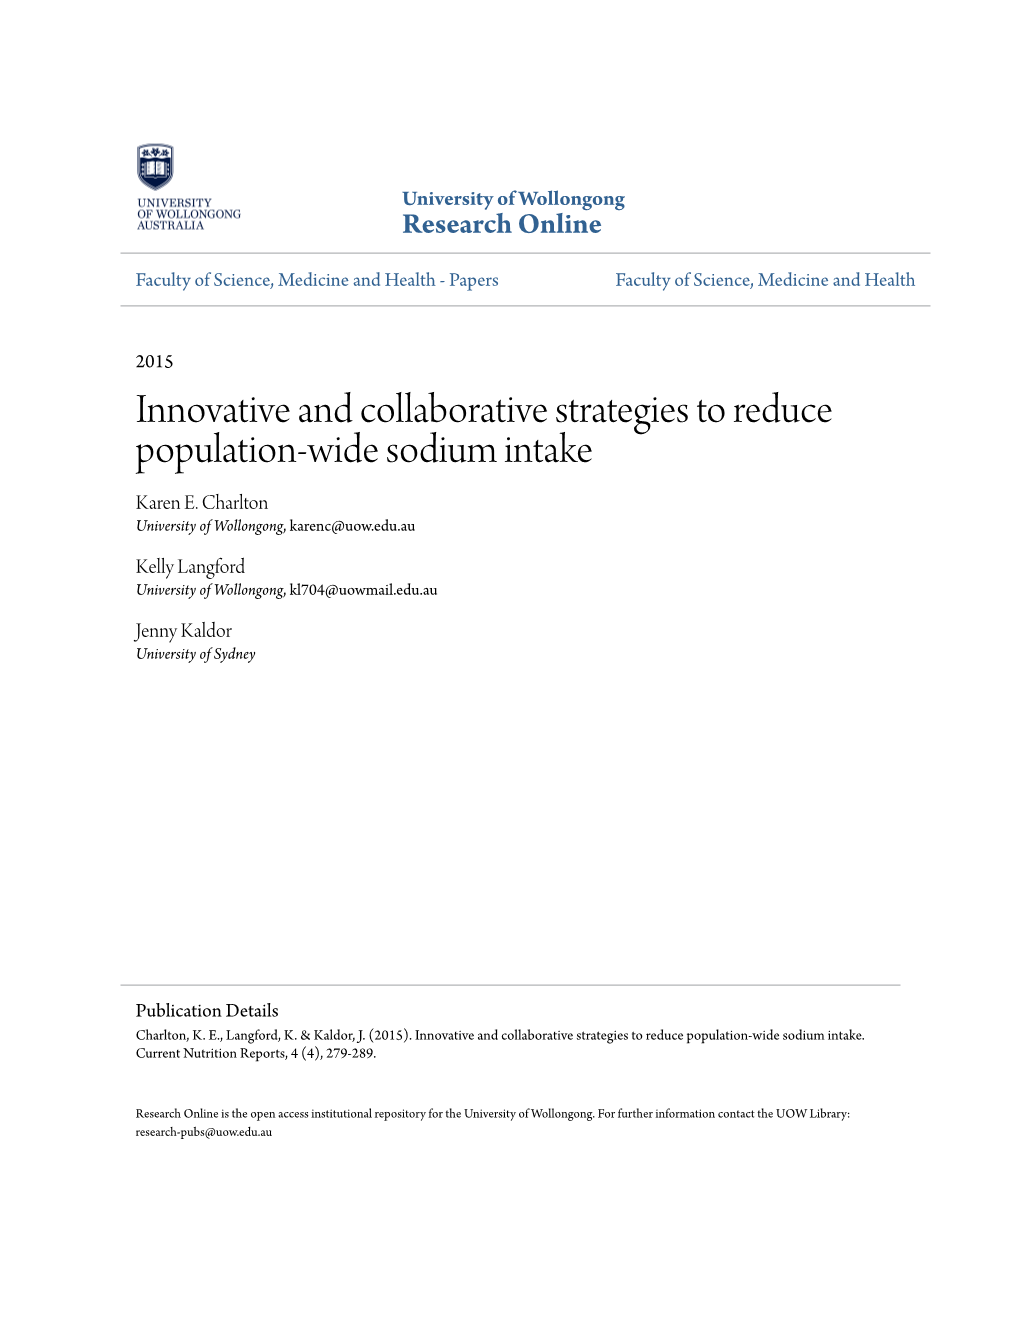 Innovative and Collaborative Strategies to Reduce Population-Wide Sodium Intake Karen E